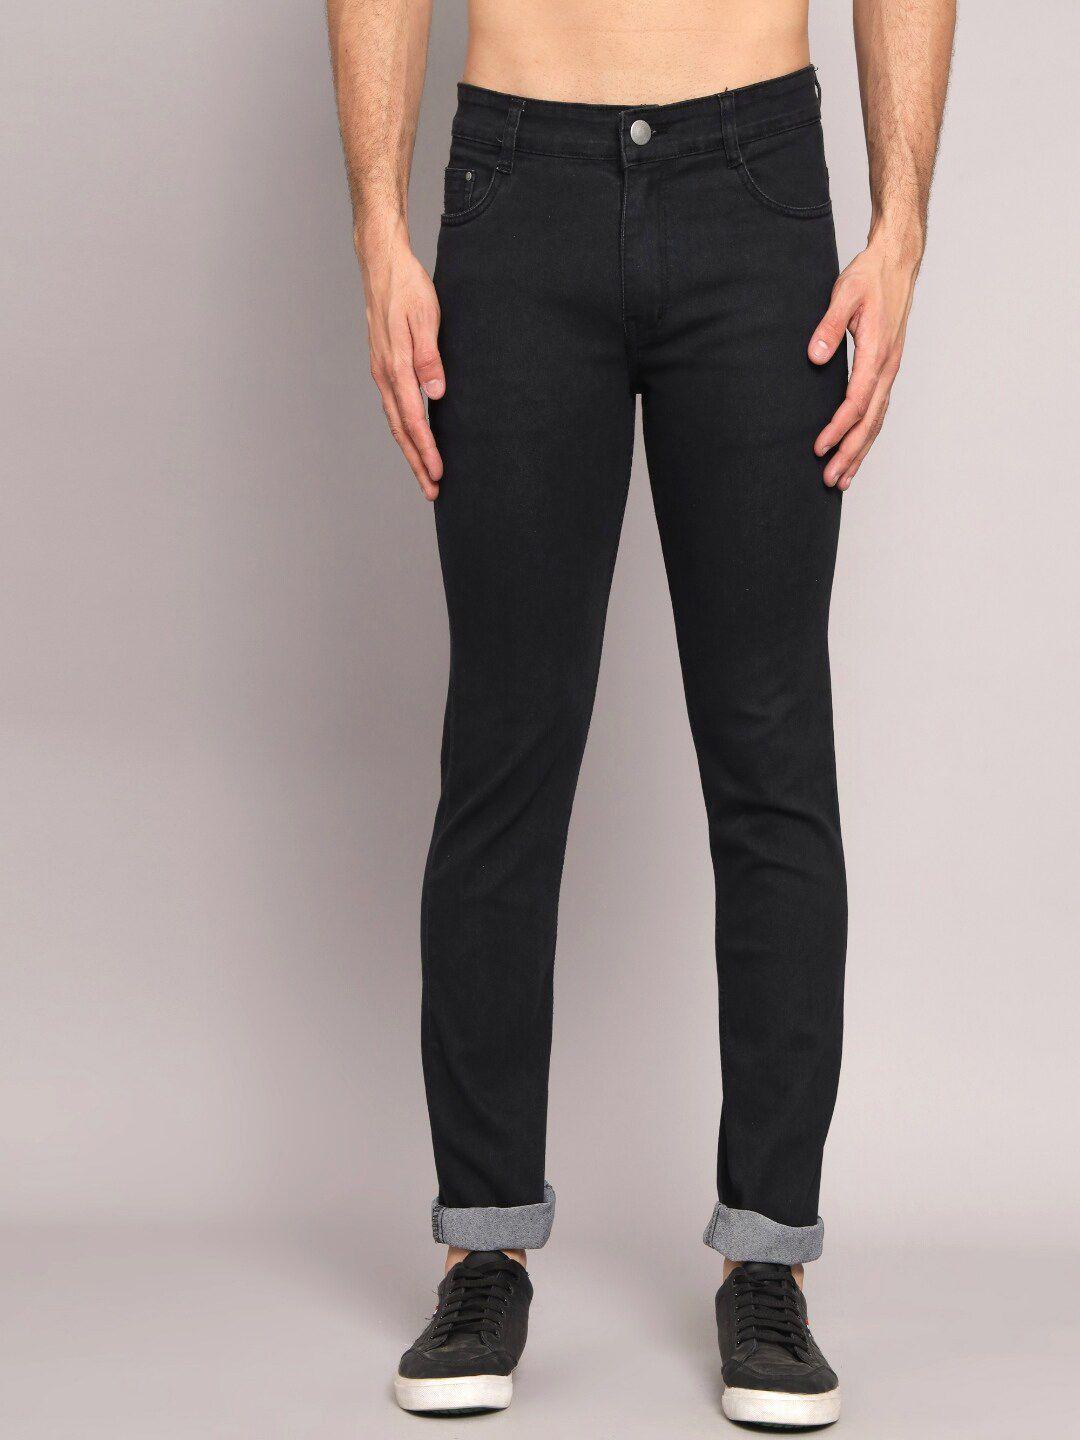 studio-nexx-men-black-relaxed-fit-low-distress-stretchable-jeans